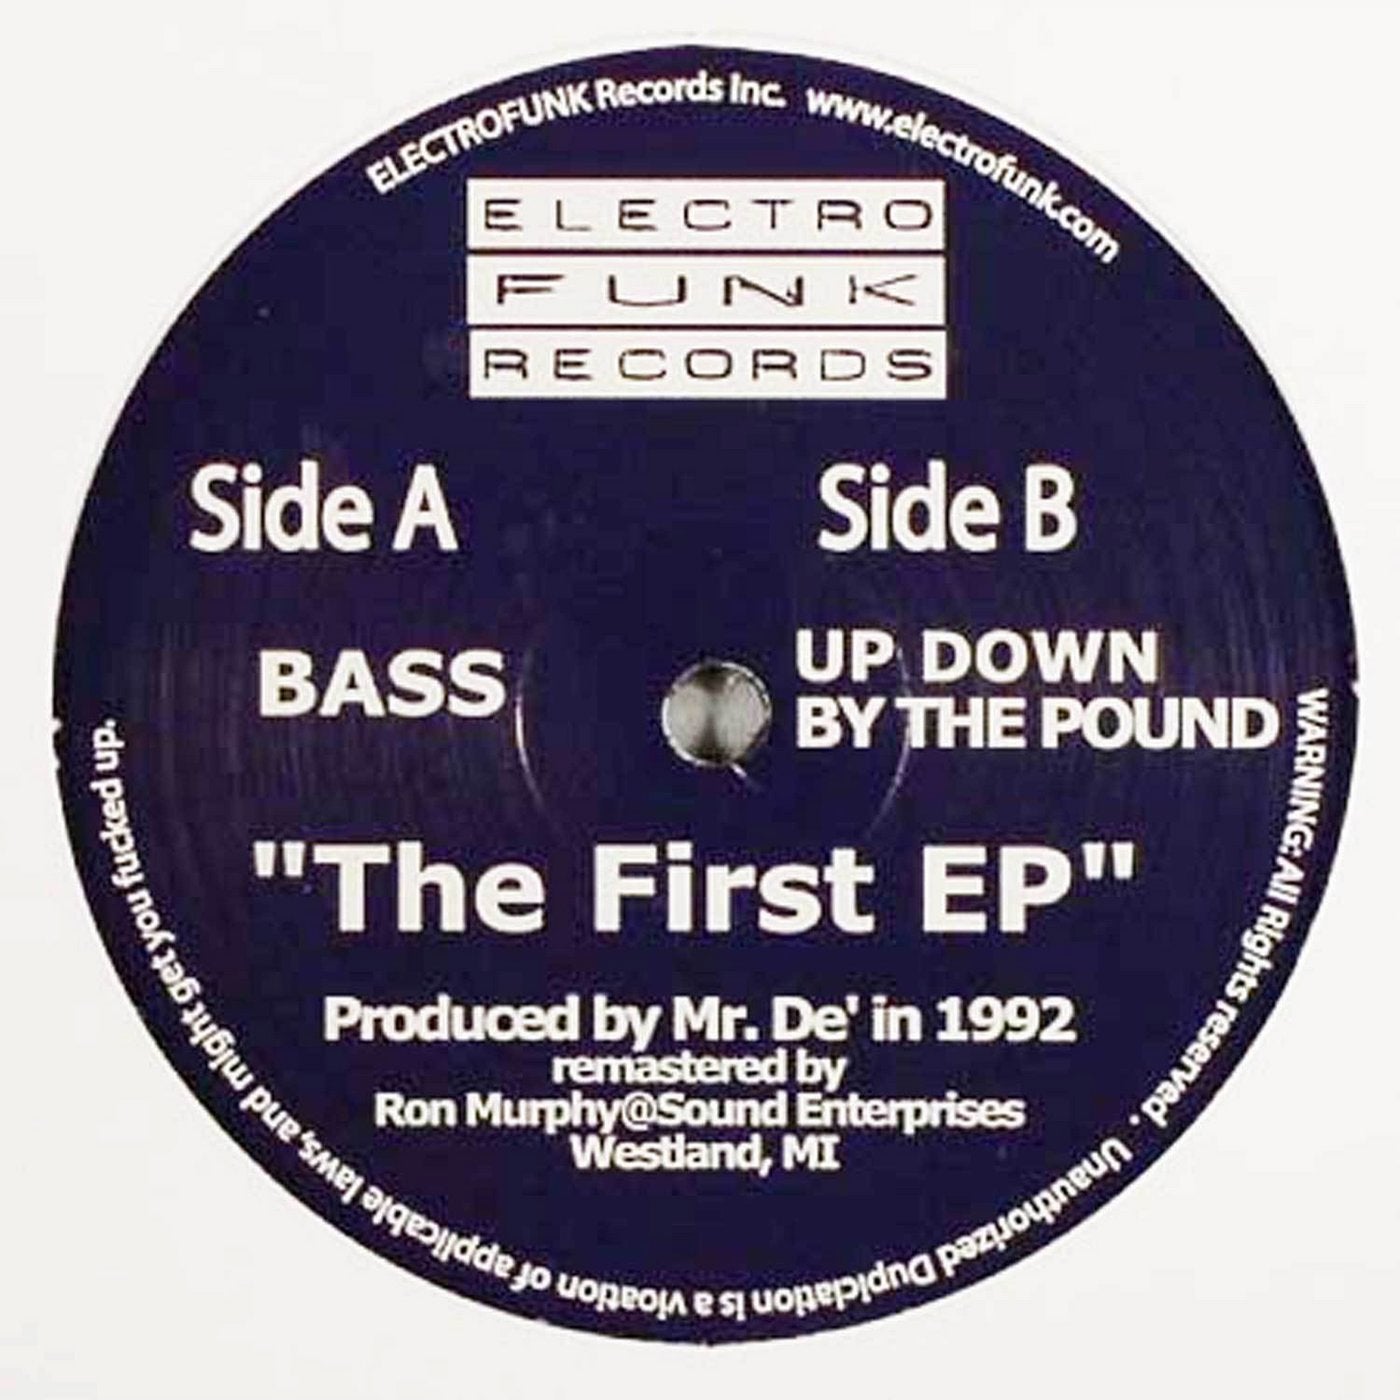 The First E.P